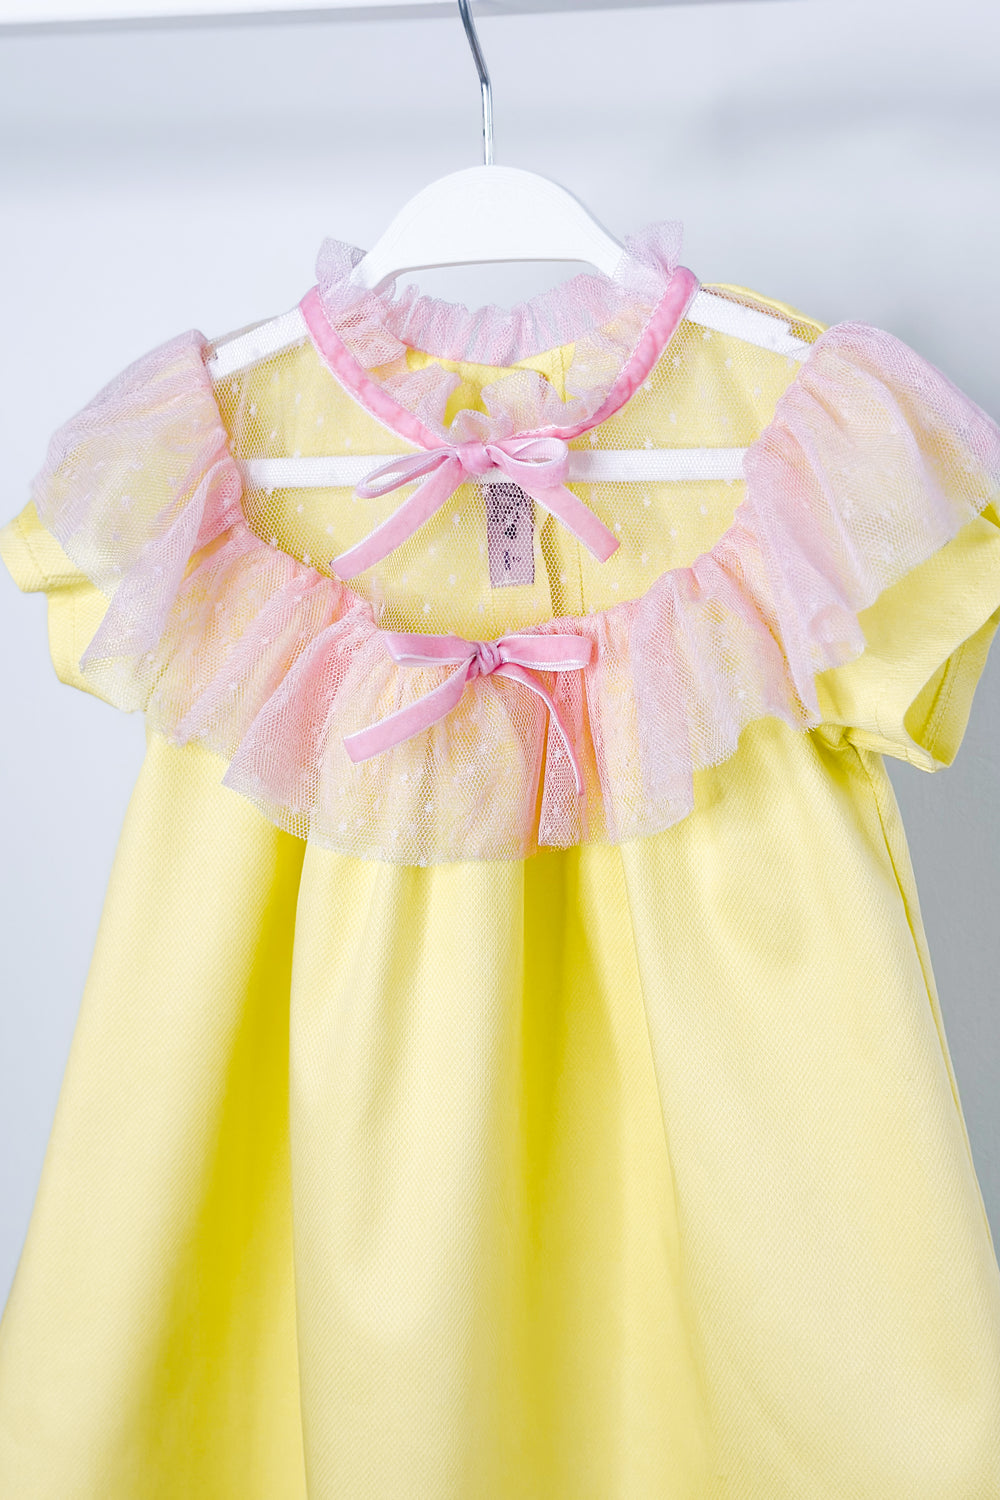 Phi "Harriet" Yellow & Pink Tulle Dress | Millie and John